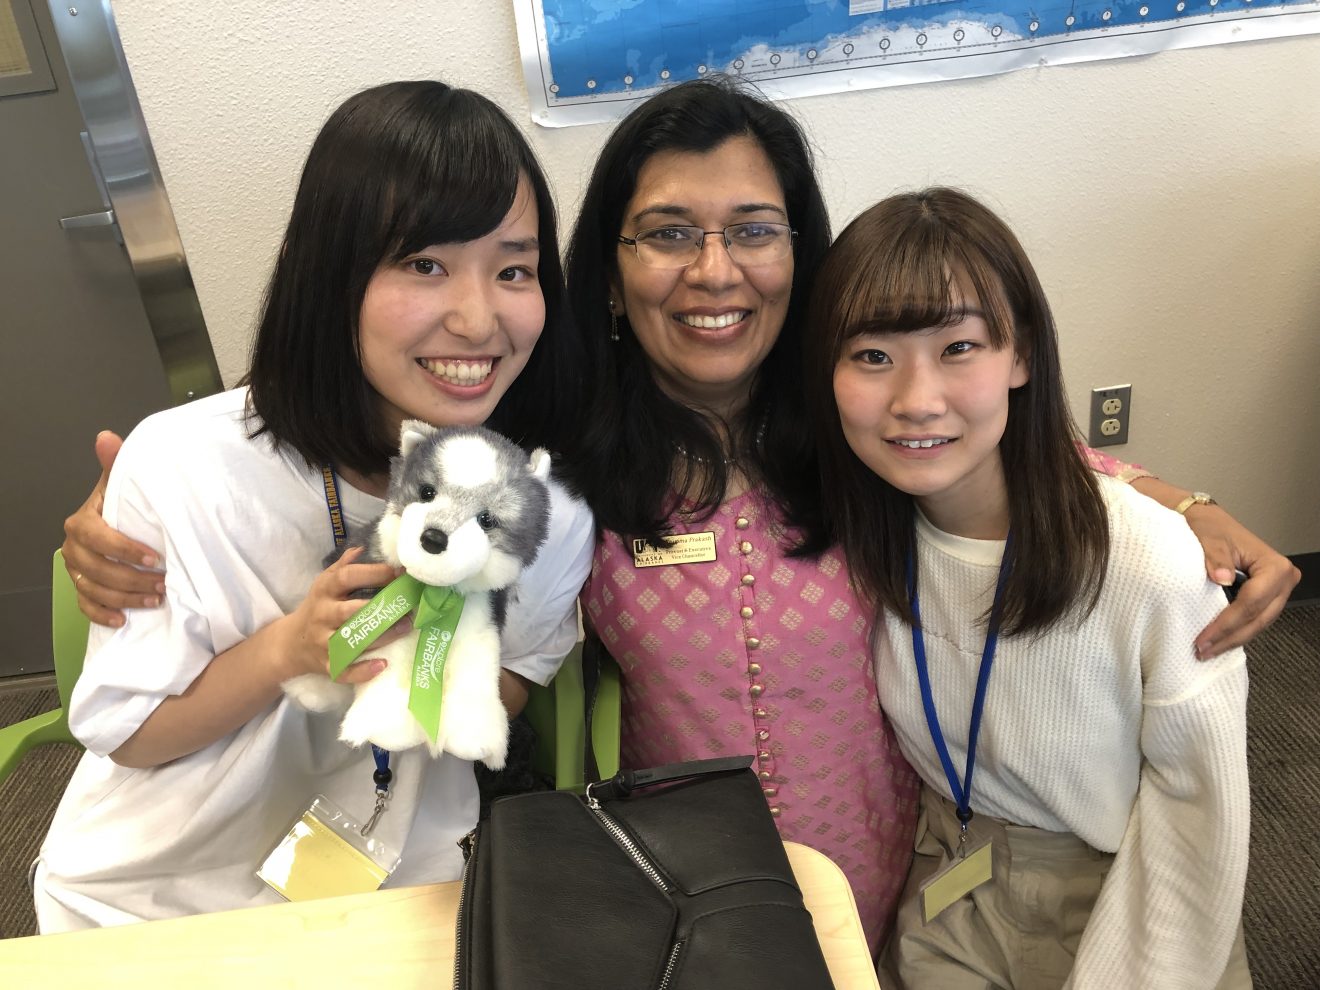 Three women poses for the camera. One is holding a small plush dog that is a souvenir.